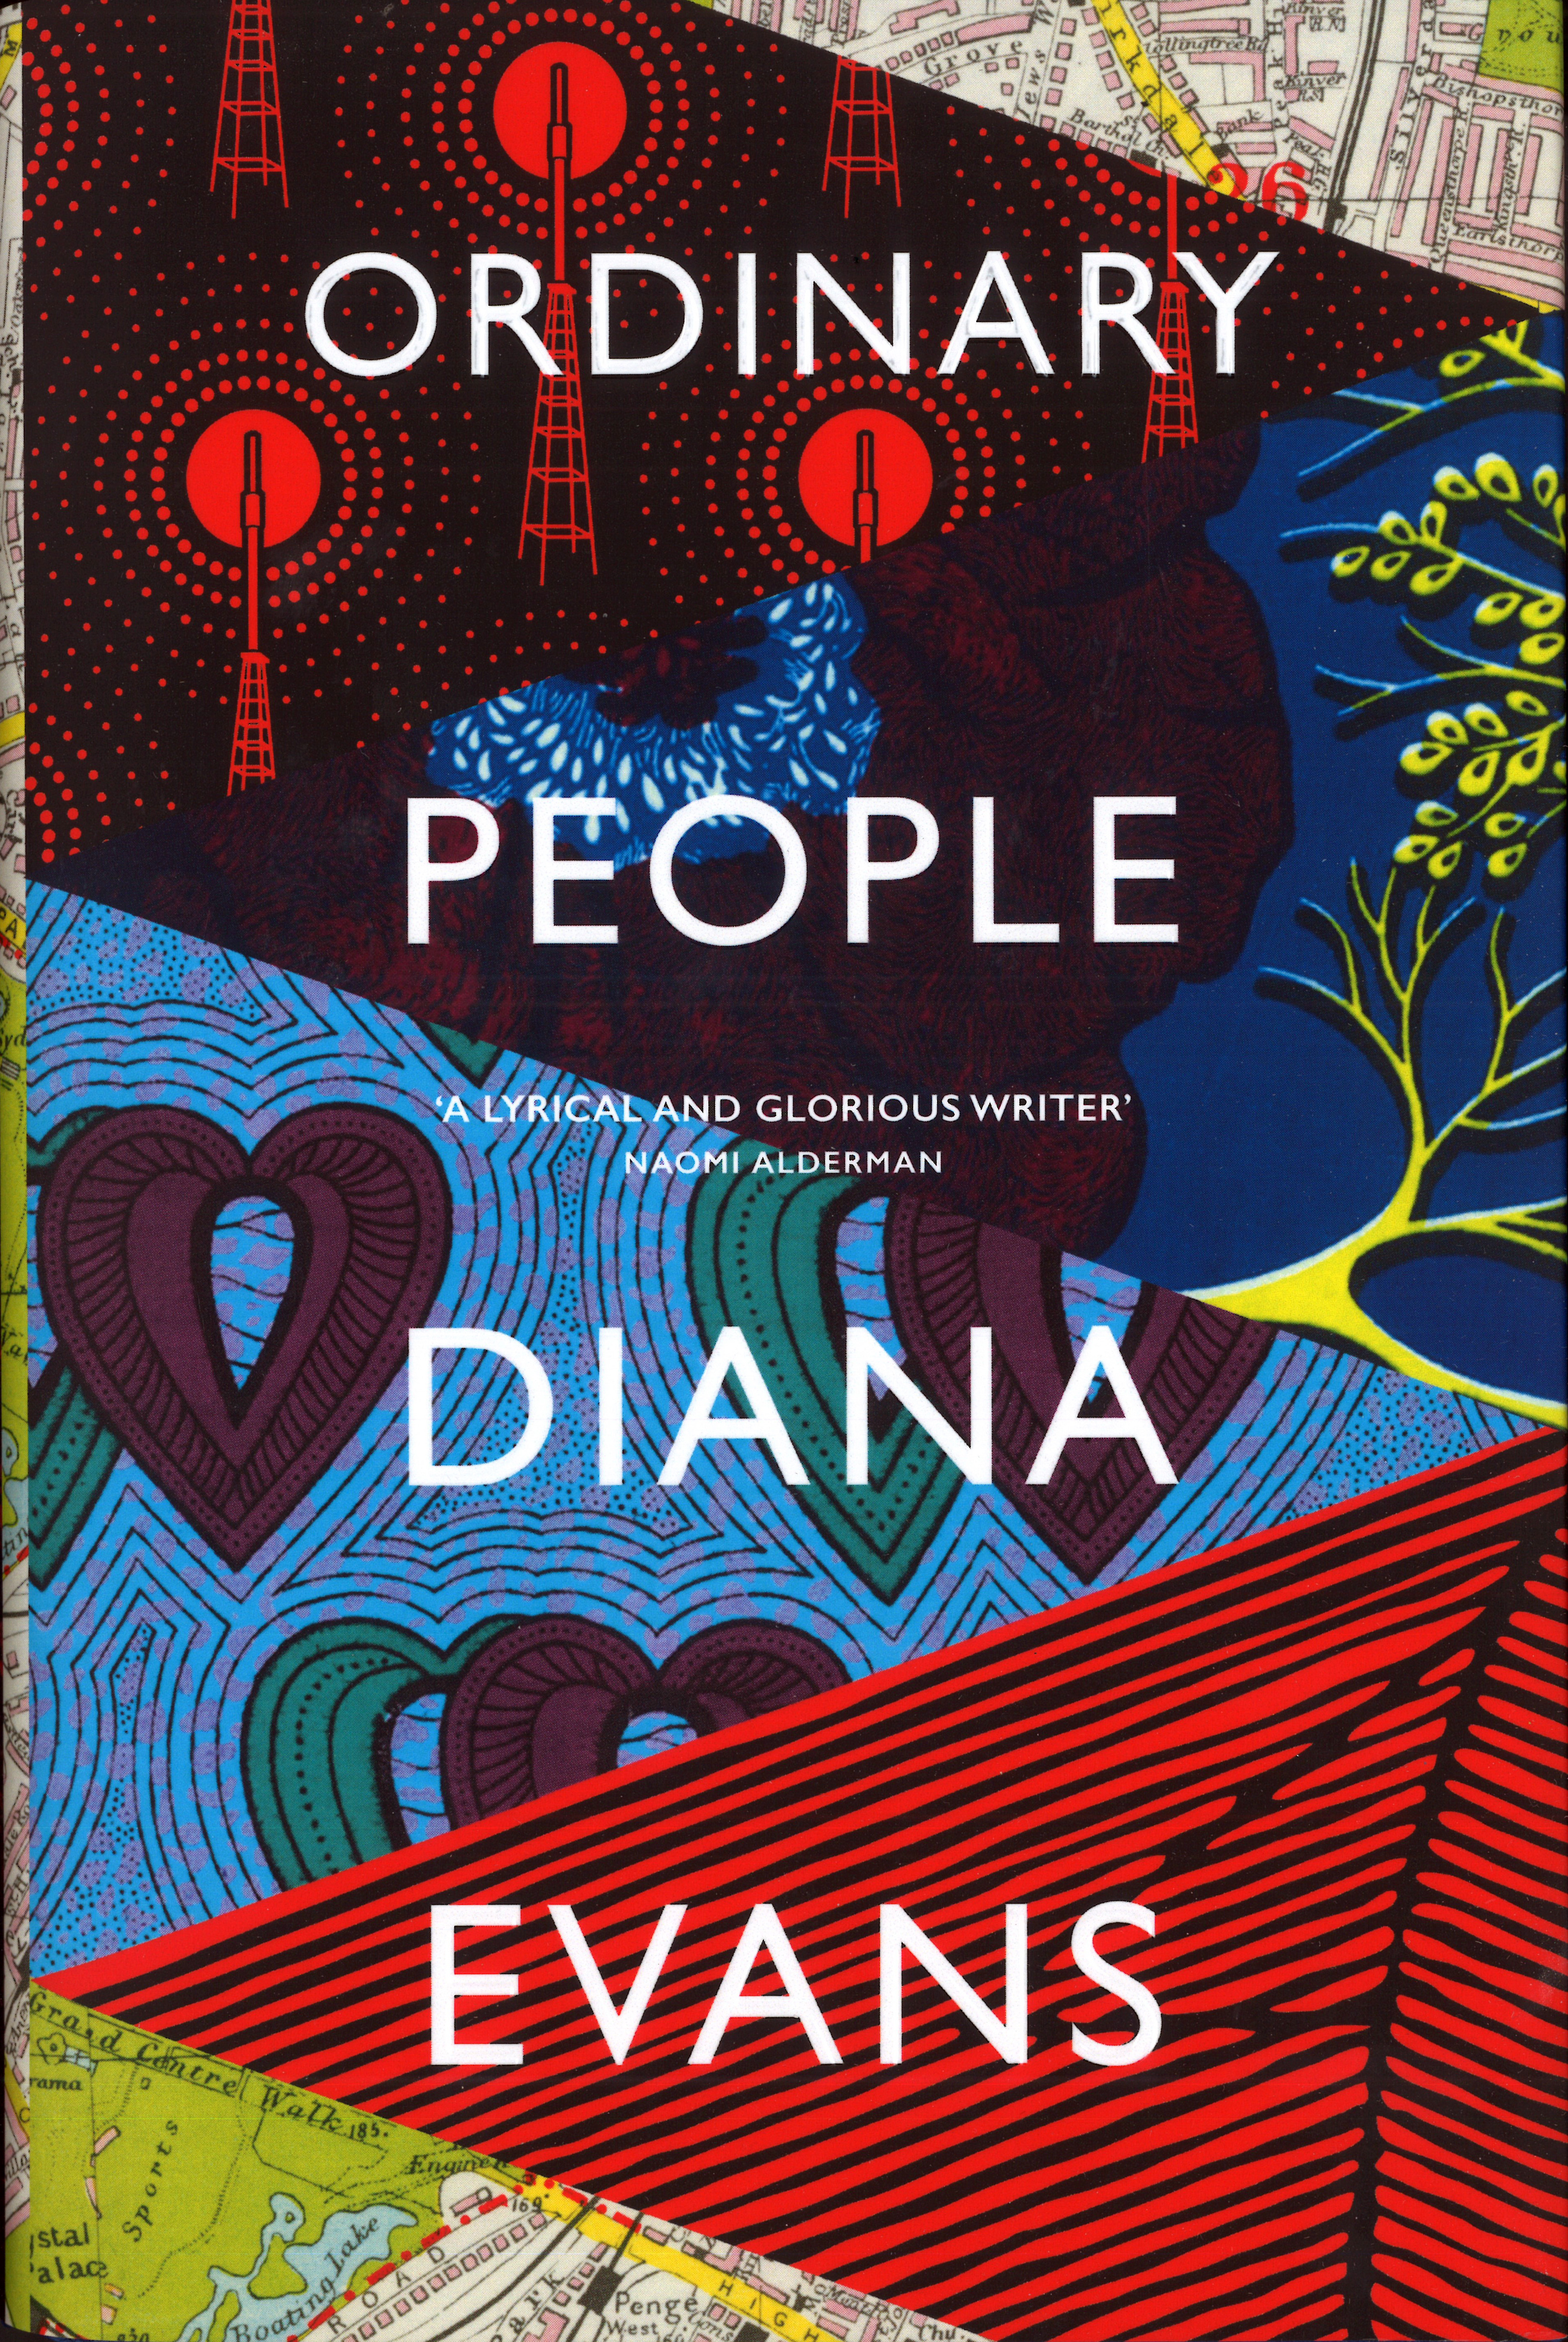 Ordinary People by Diana Evans, Chatto & Windus 2018